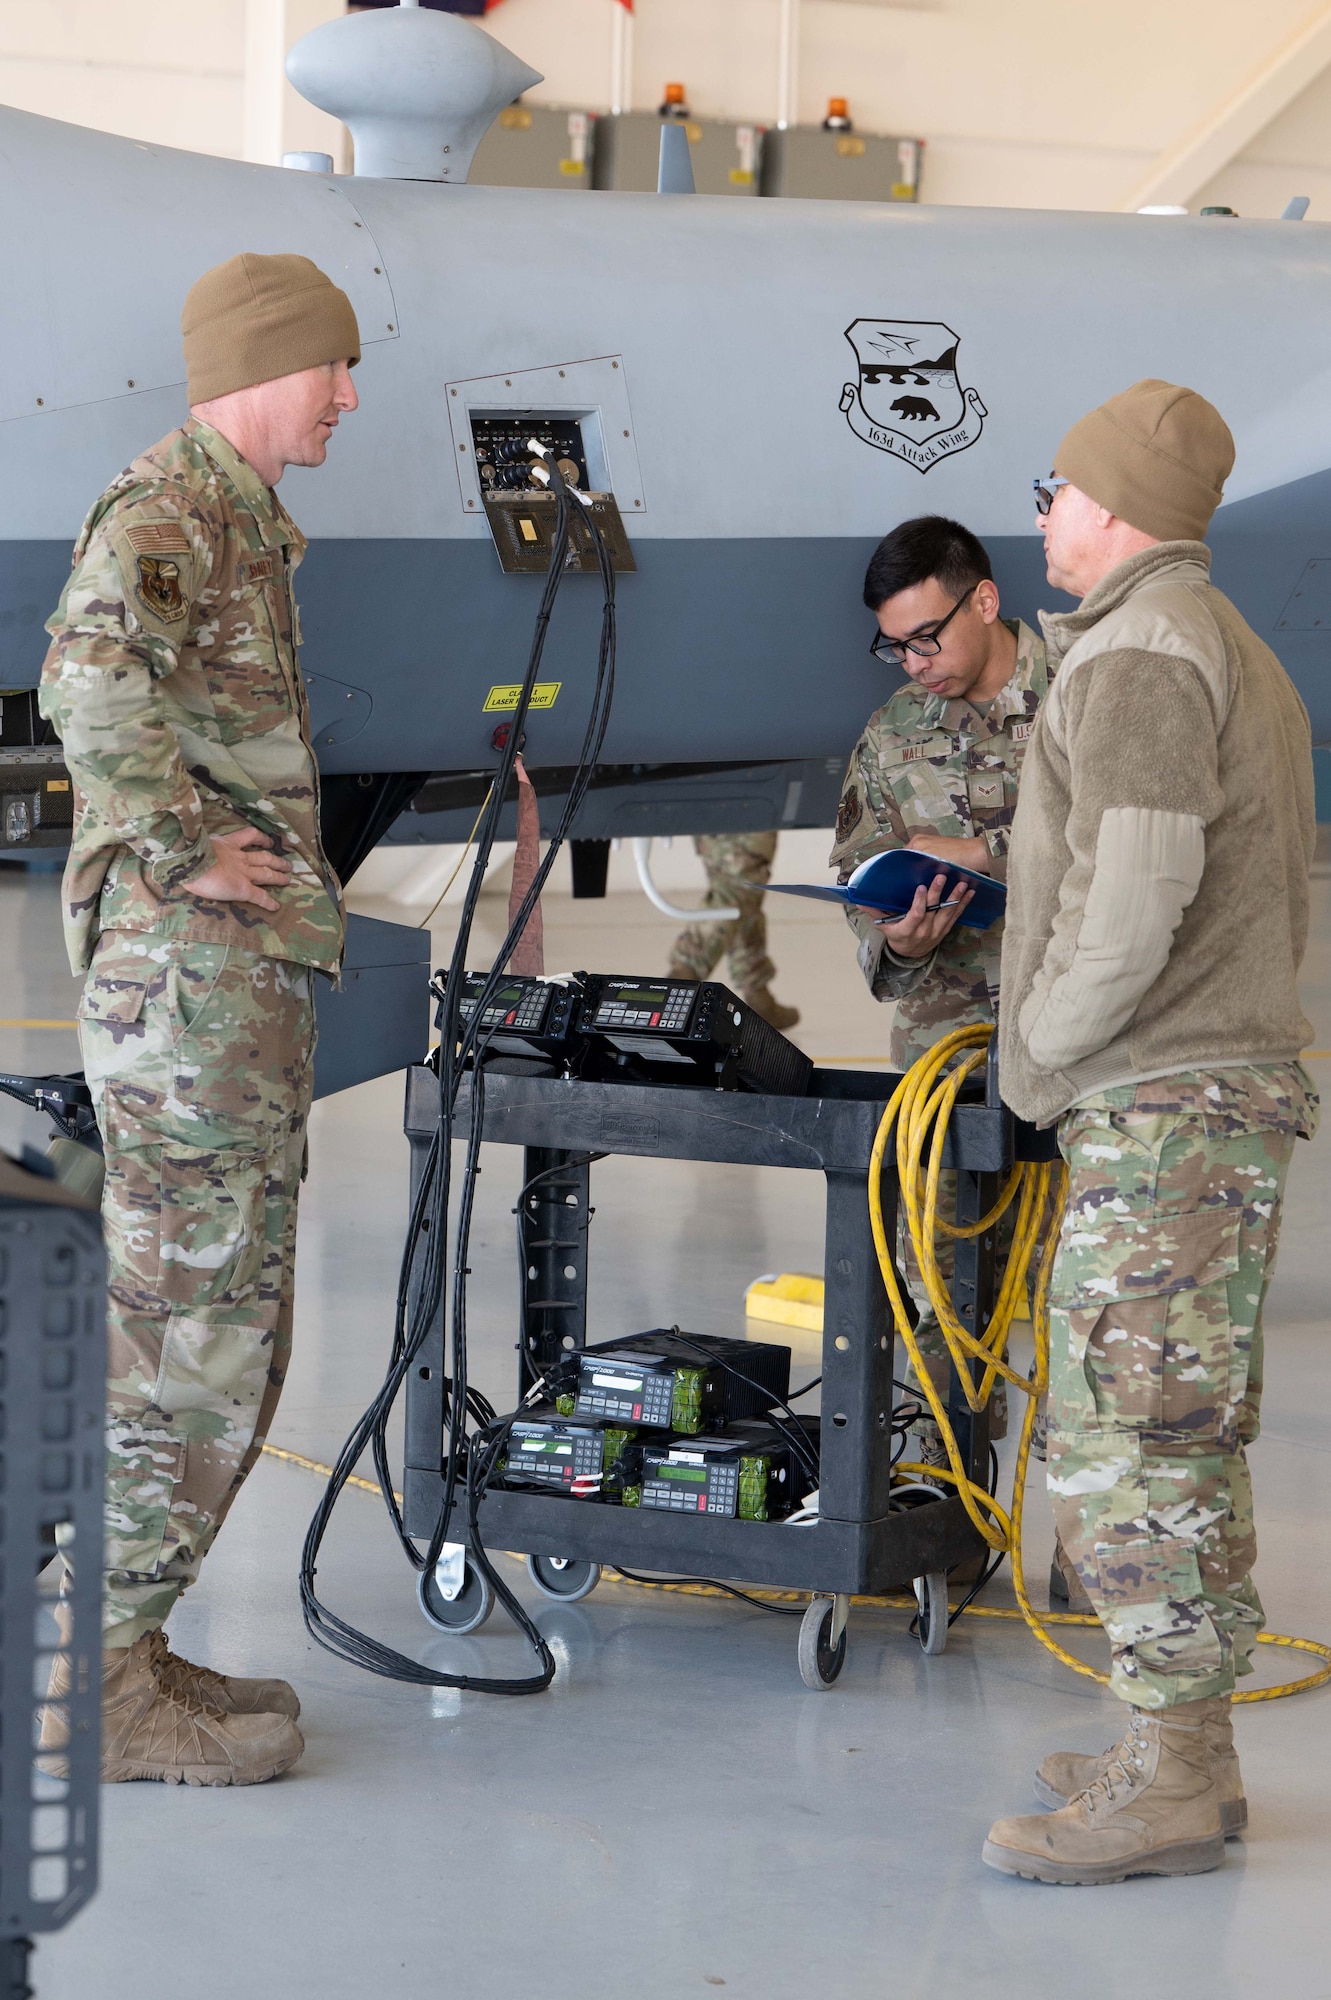 Airmen assigned to the 214 LRE at U.S. Army Fort Huachuca, Arizona, prepare an MQ-9 Reaper for an operational assessment flight with the REAP 2.0 payload on March 11.